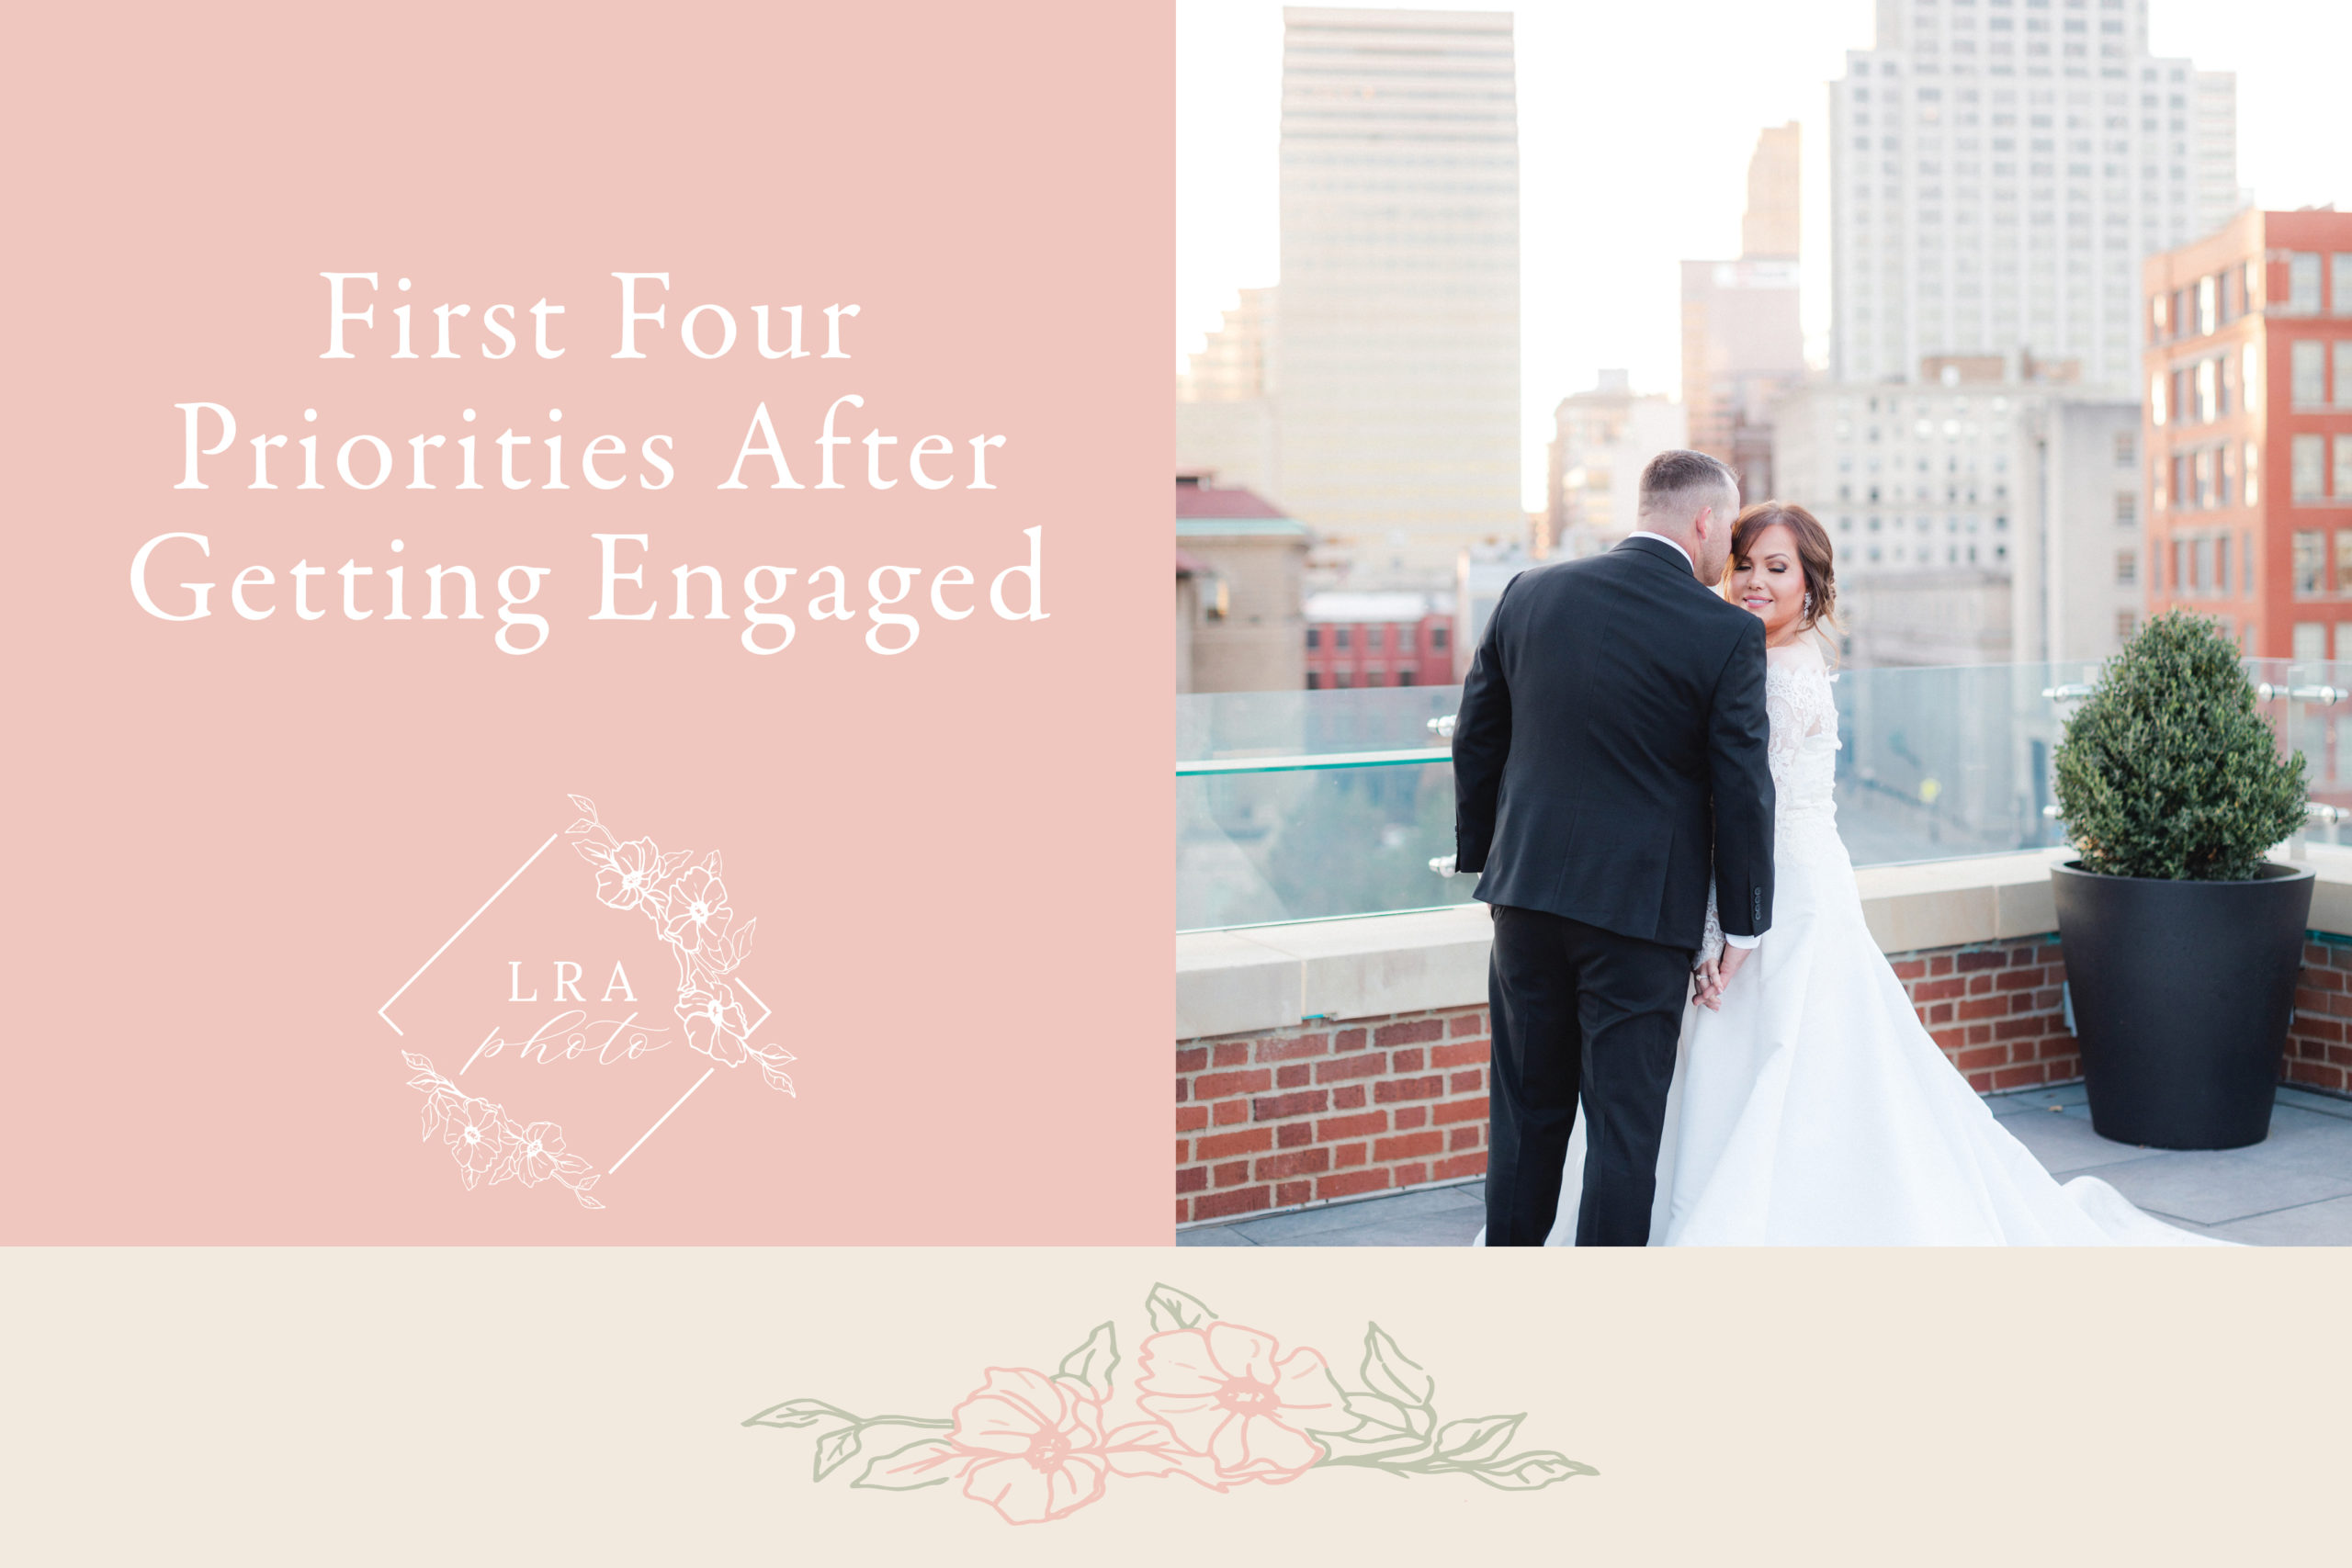 First Four Priorities After Getting Engaged